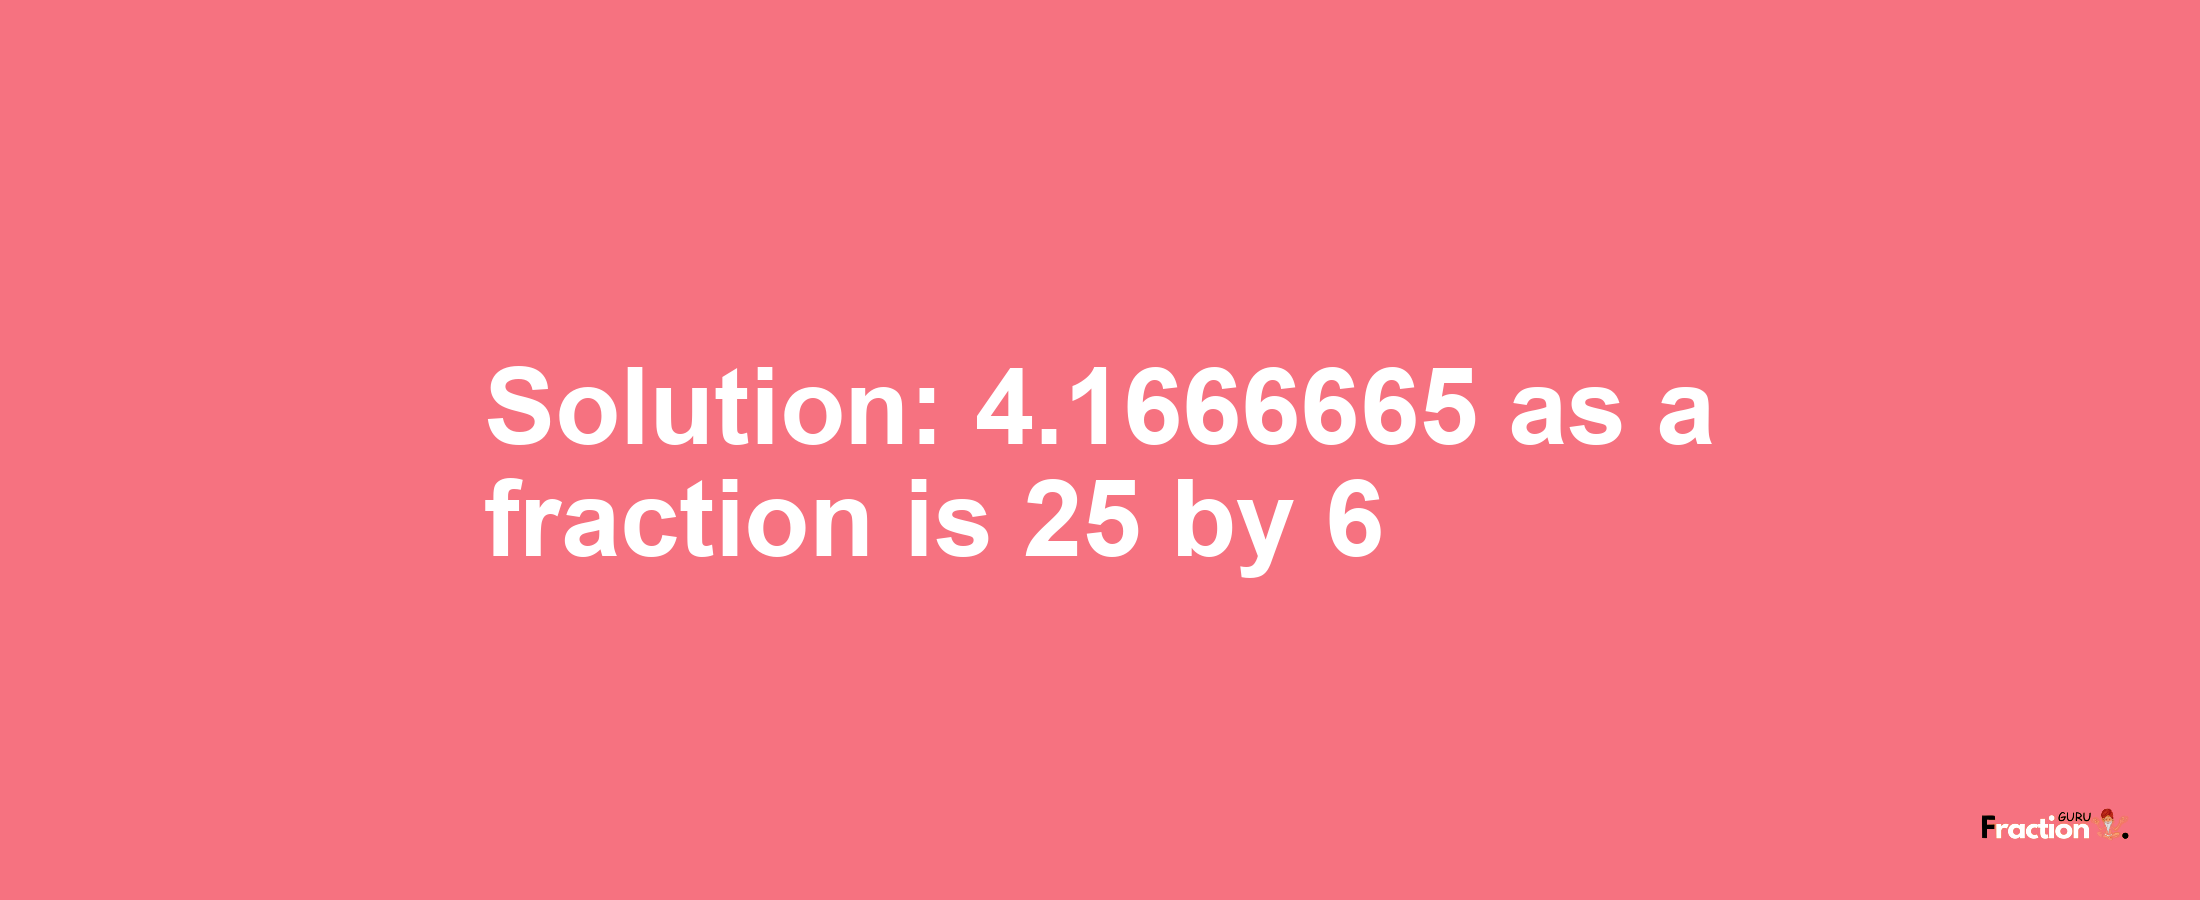 Solution:4.1666665 as a fraction is 25/6